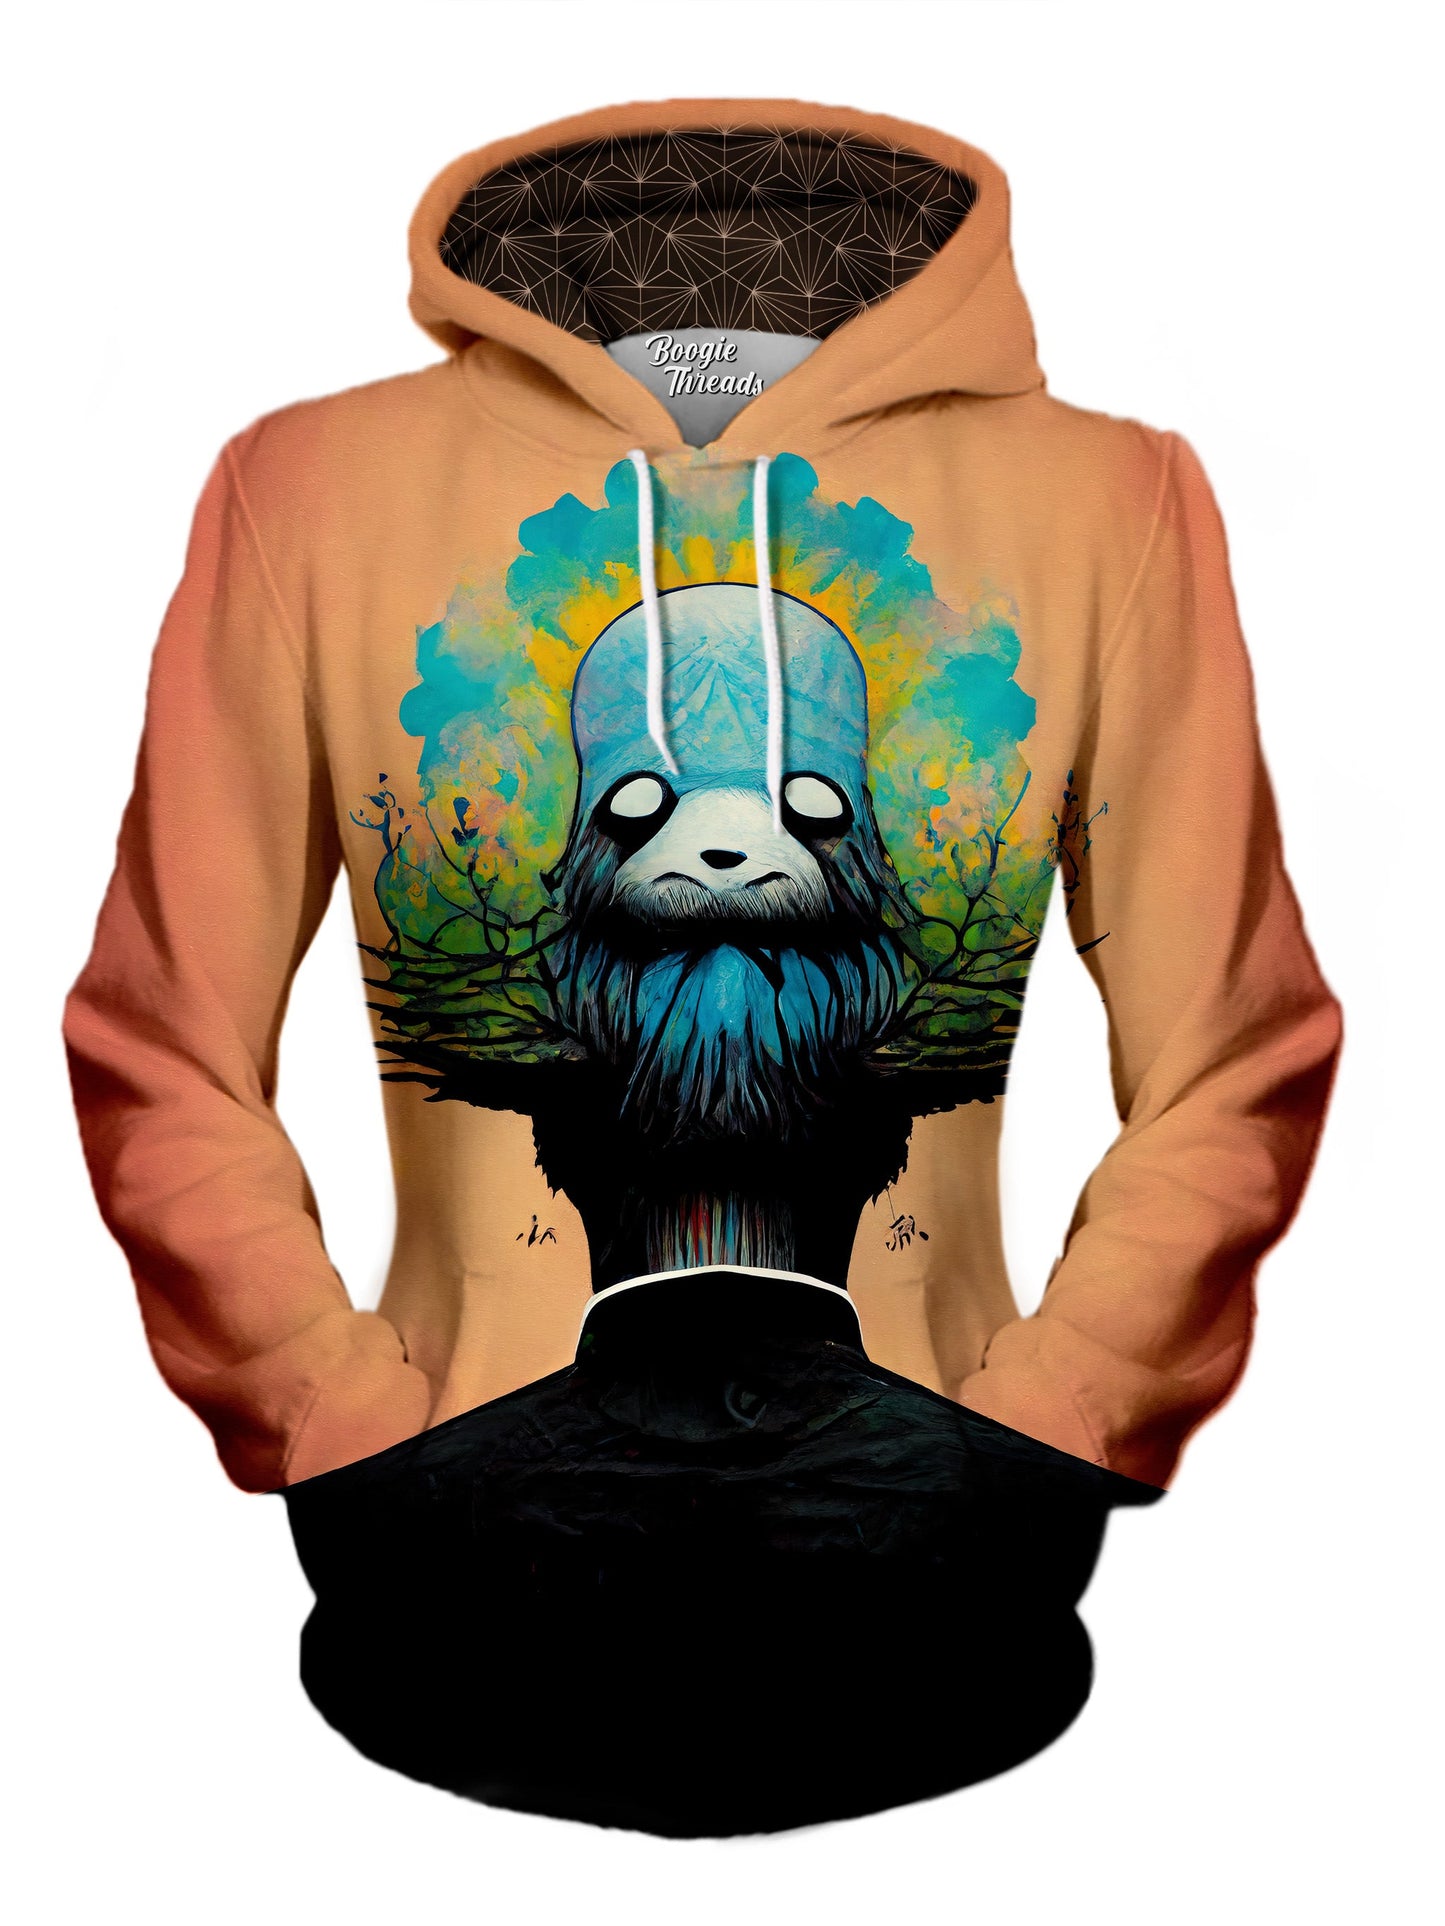 bright orange and blue alex pardee artwork printed on hoodie - made with midjourney